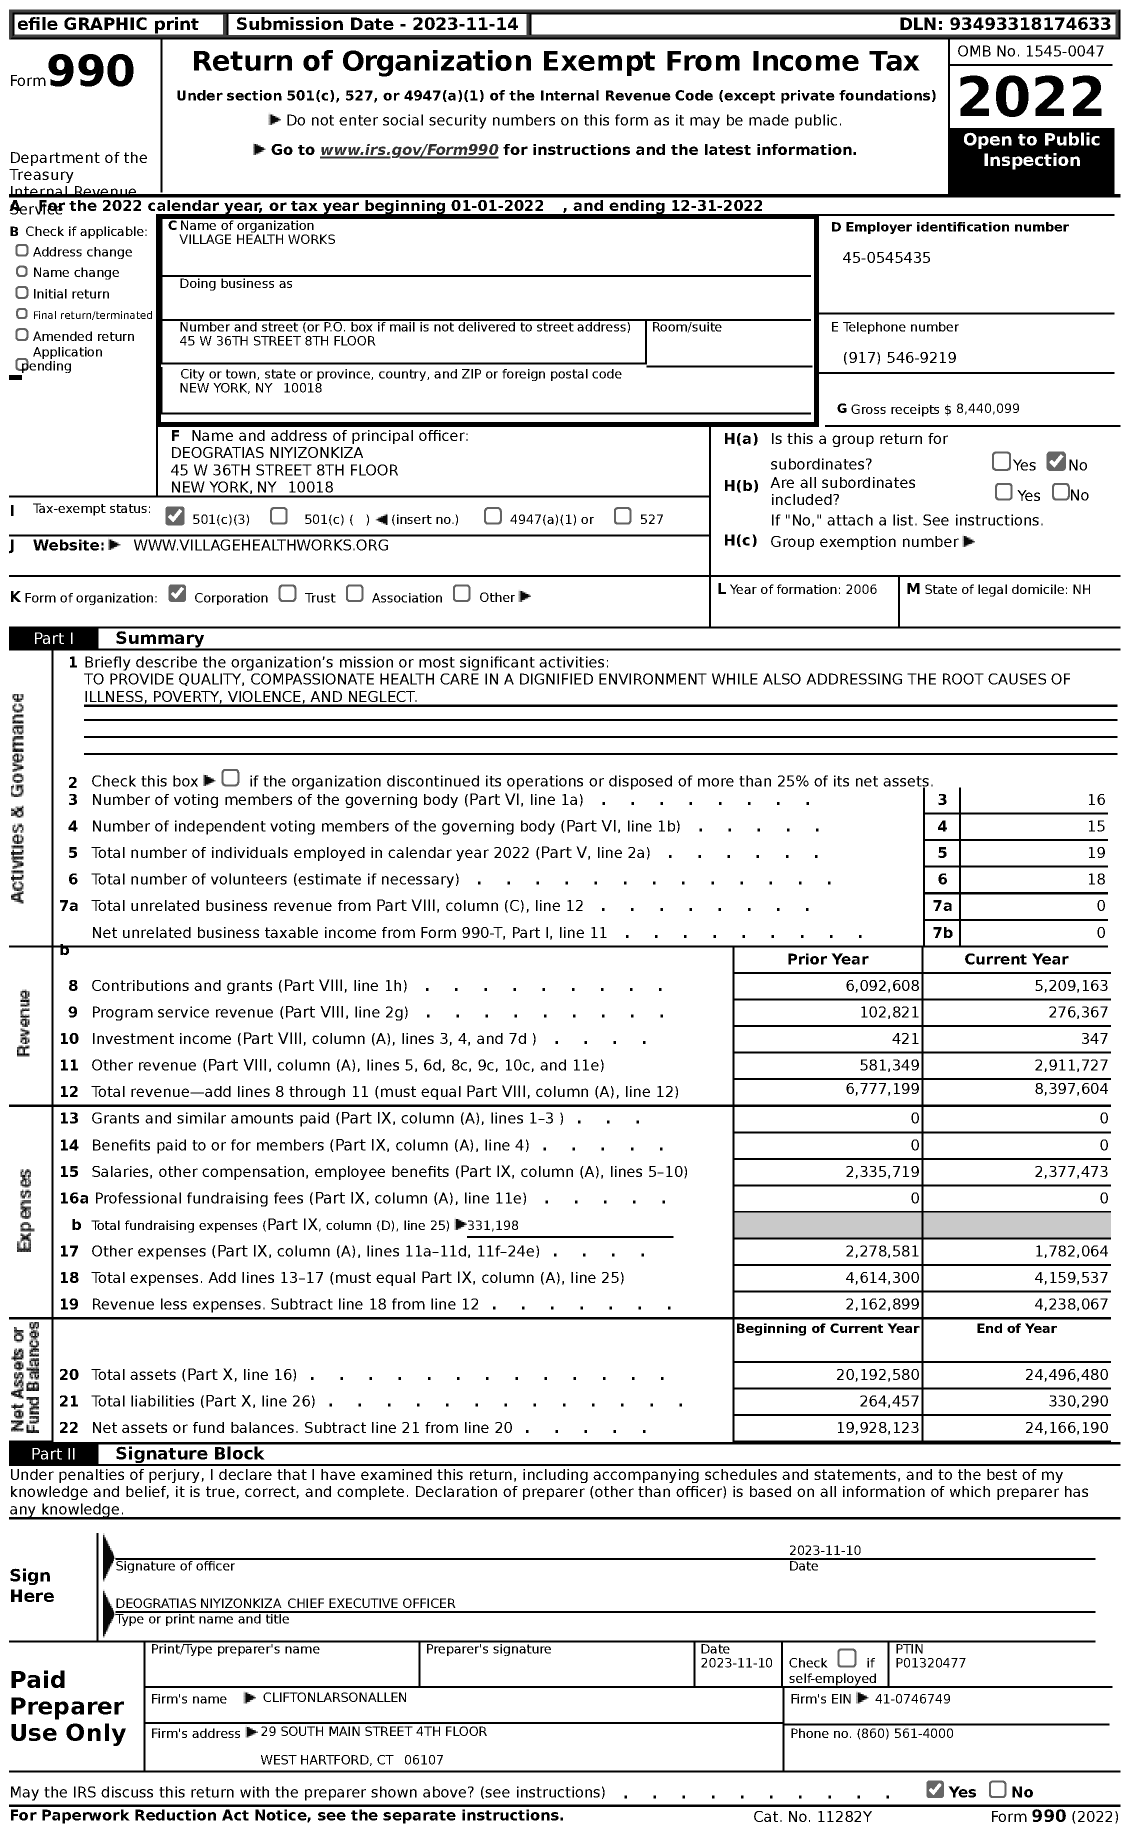 Image of first page of 2022 Form 990 for Village Health Works (VHW)